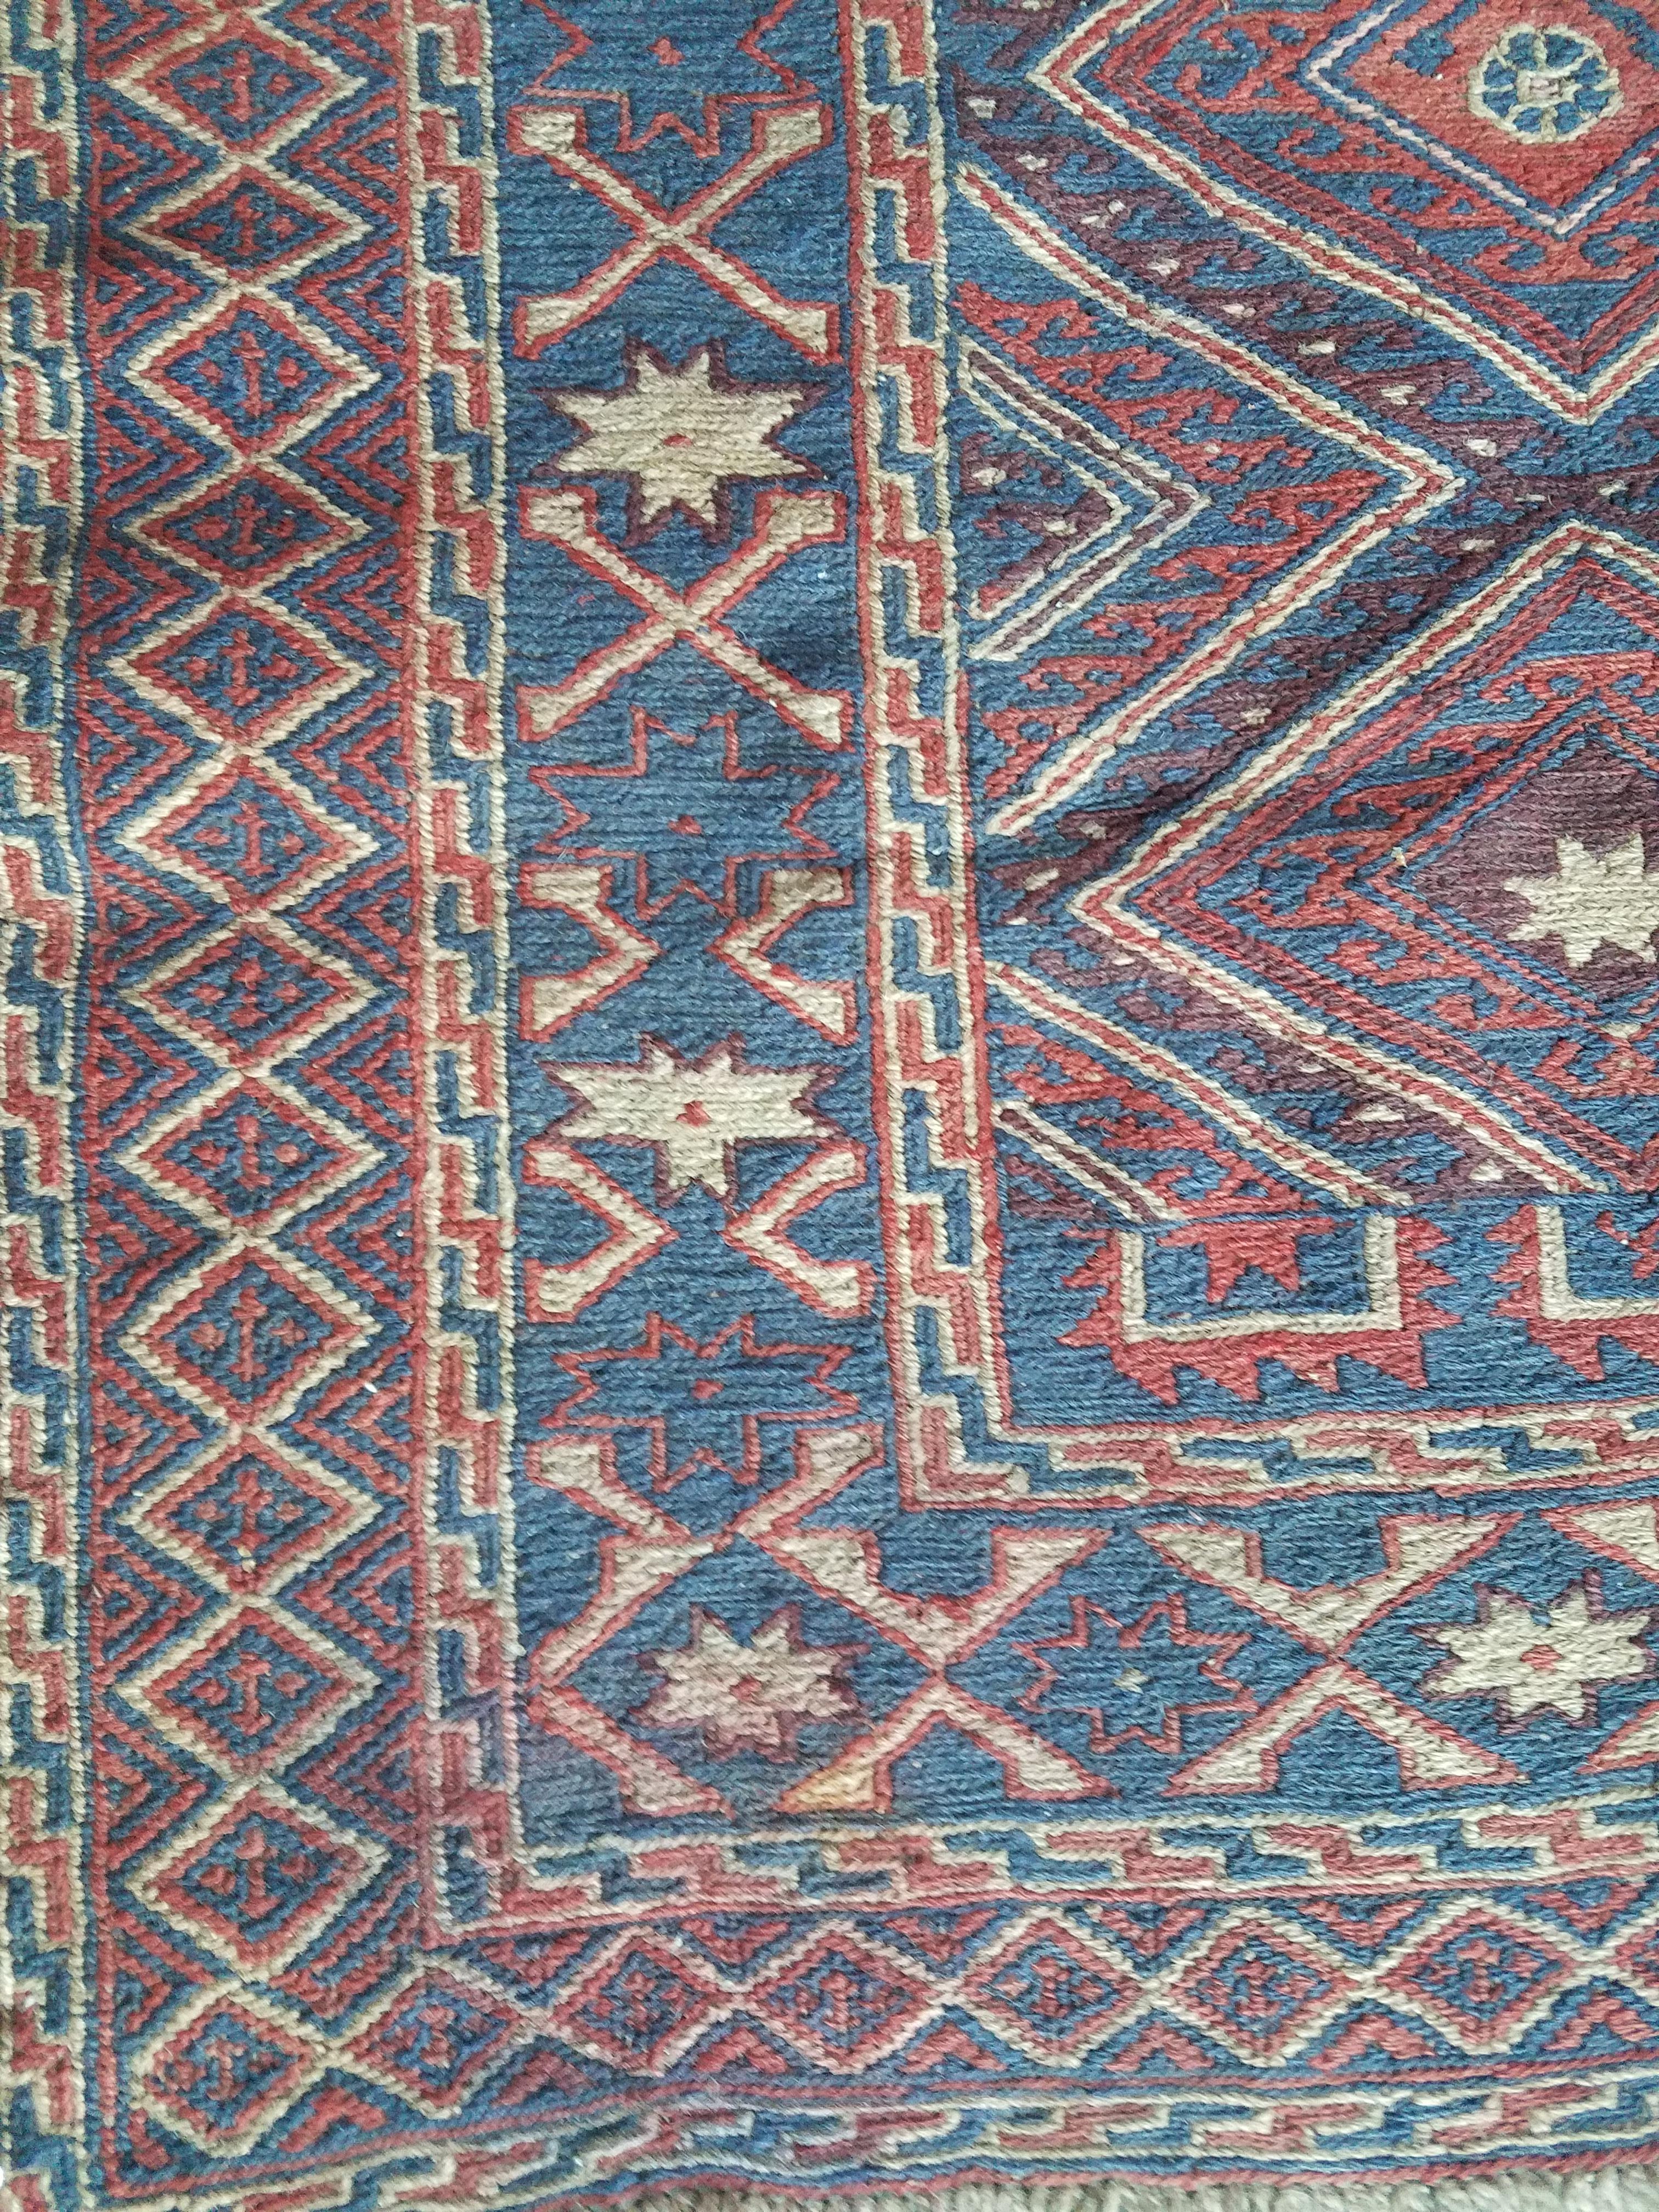 Incredible Oriental area rug measuring approximately 72